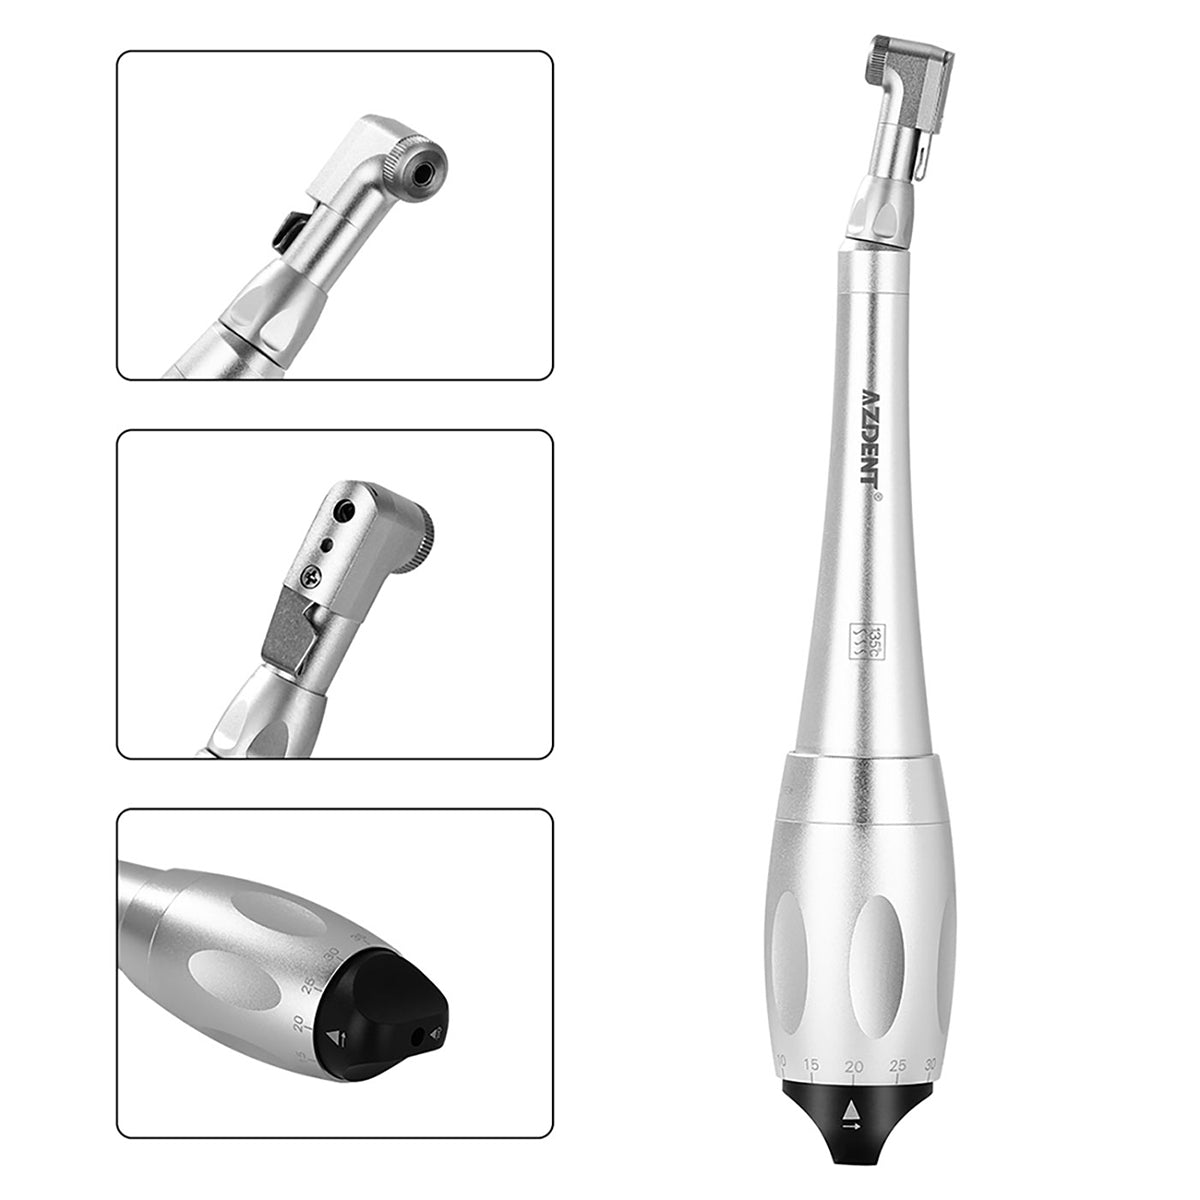 Universal Implant Torque Wrench Handpiece Kit with 2 Heads 12 Drivers - pairaydental.com